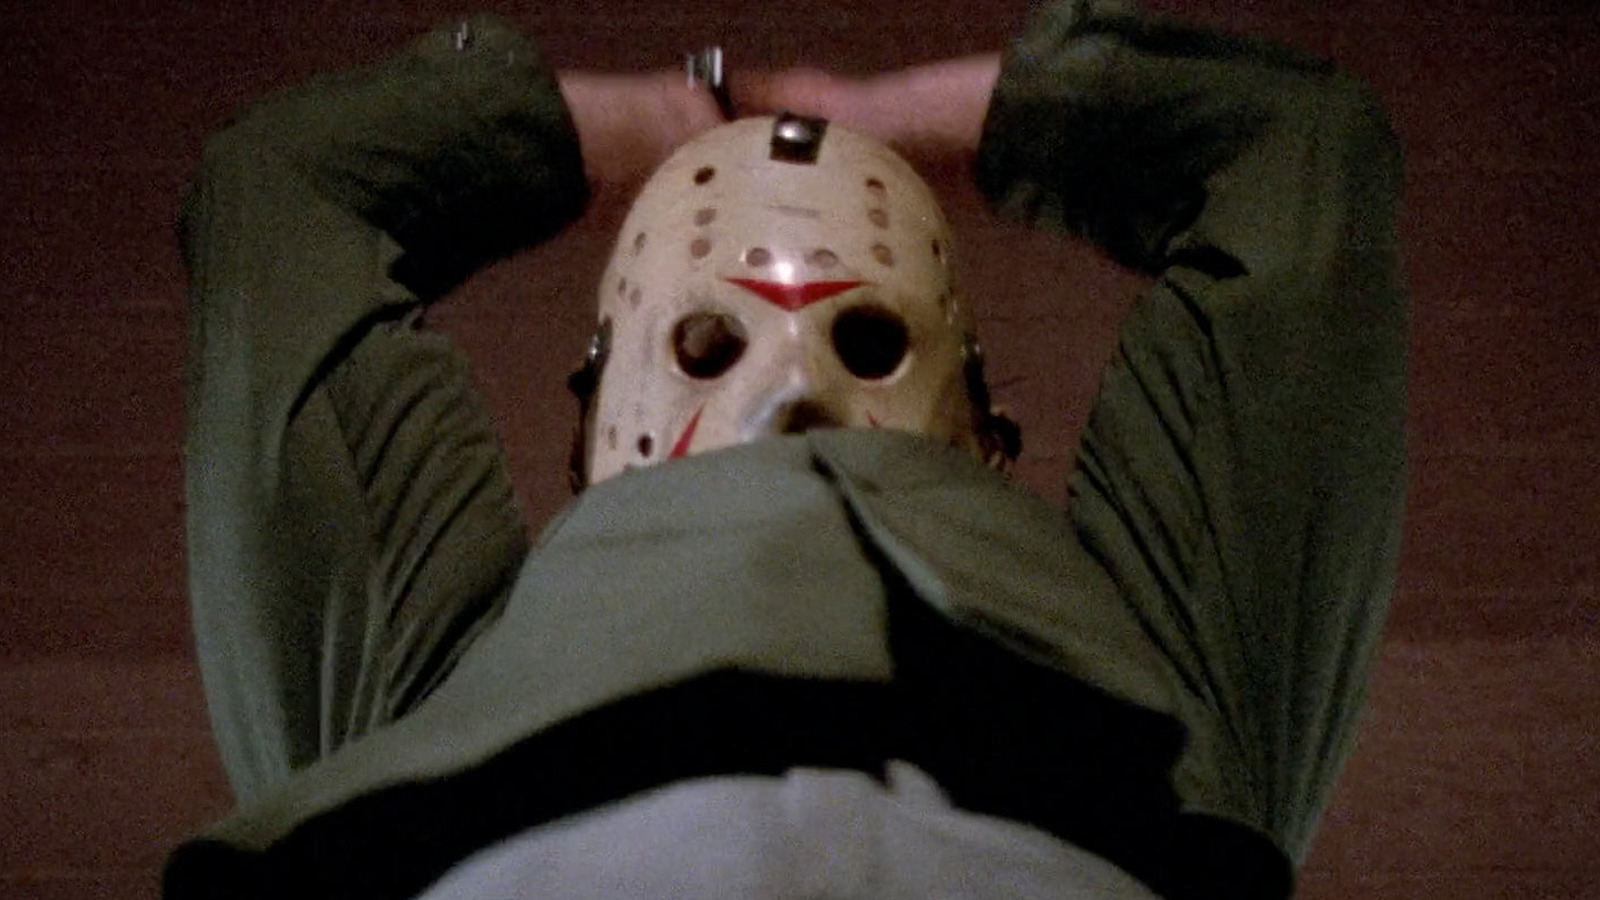 Friday The 13th Part 3 Sparked A Debate Over Jasons Famous Hockey Mask